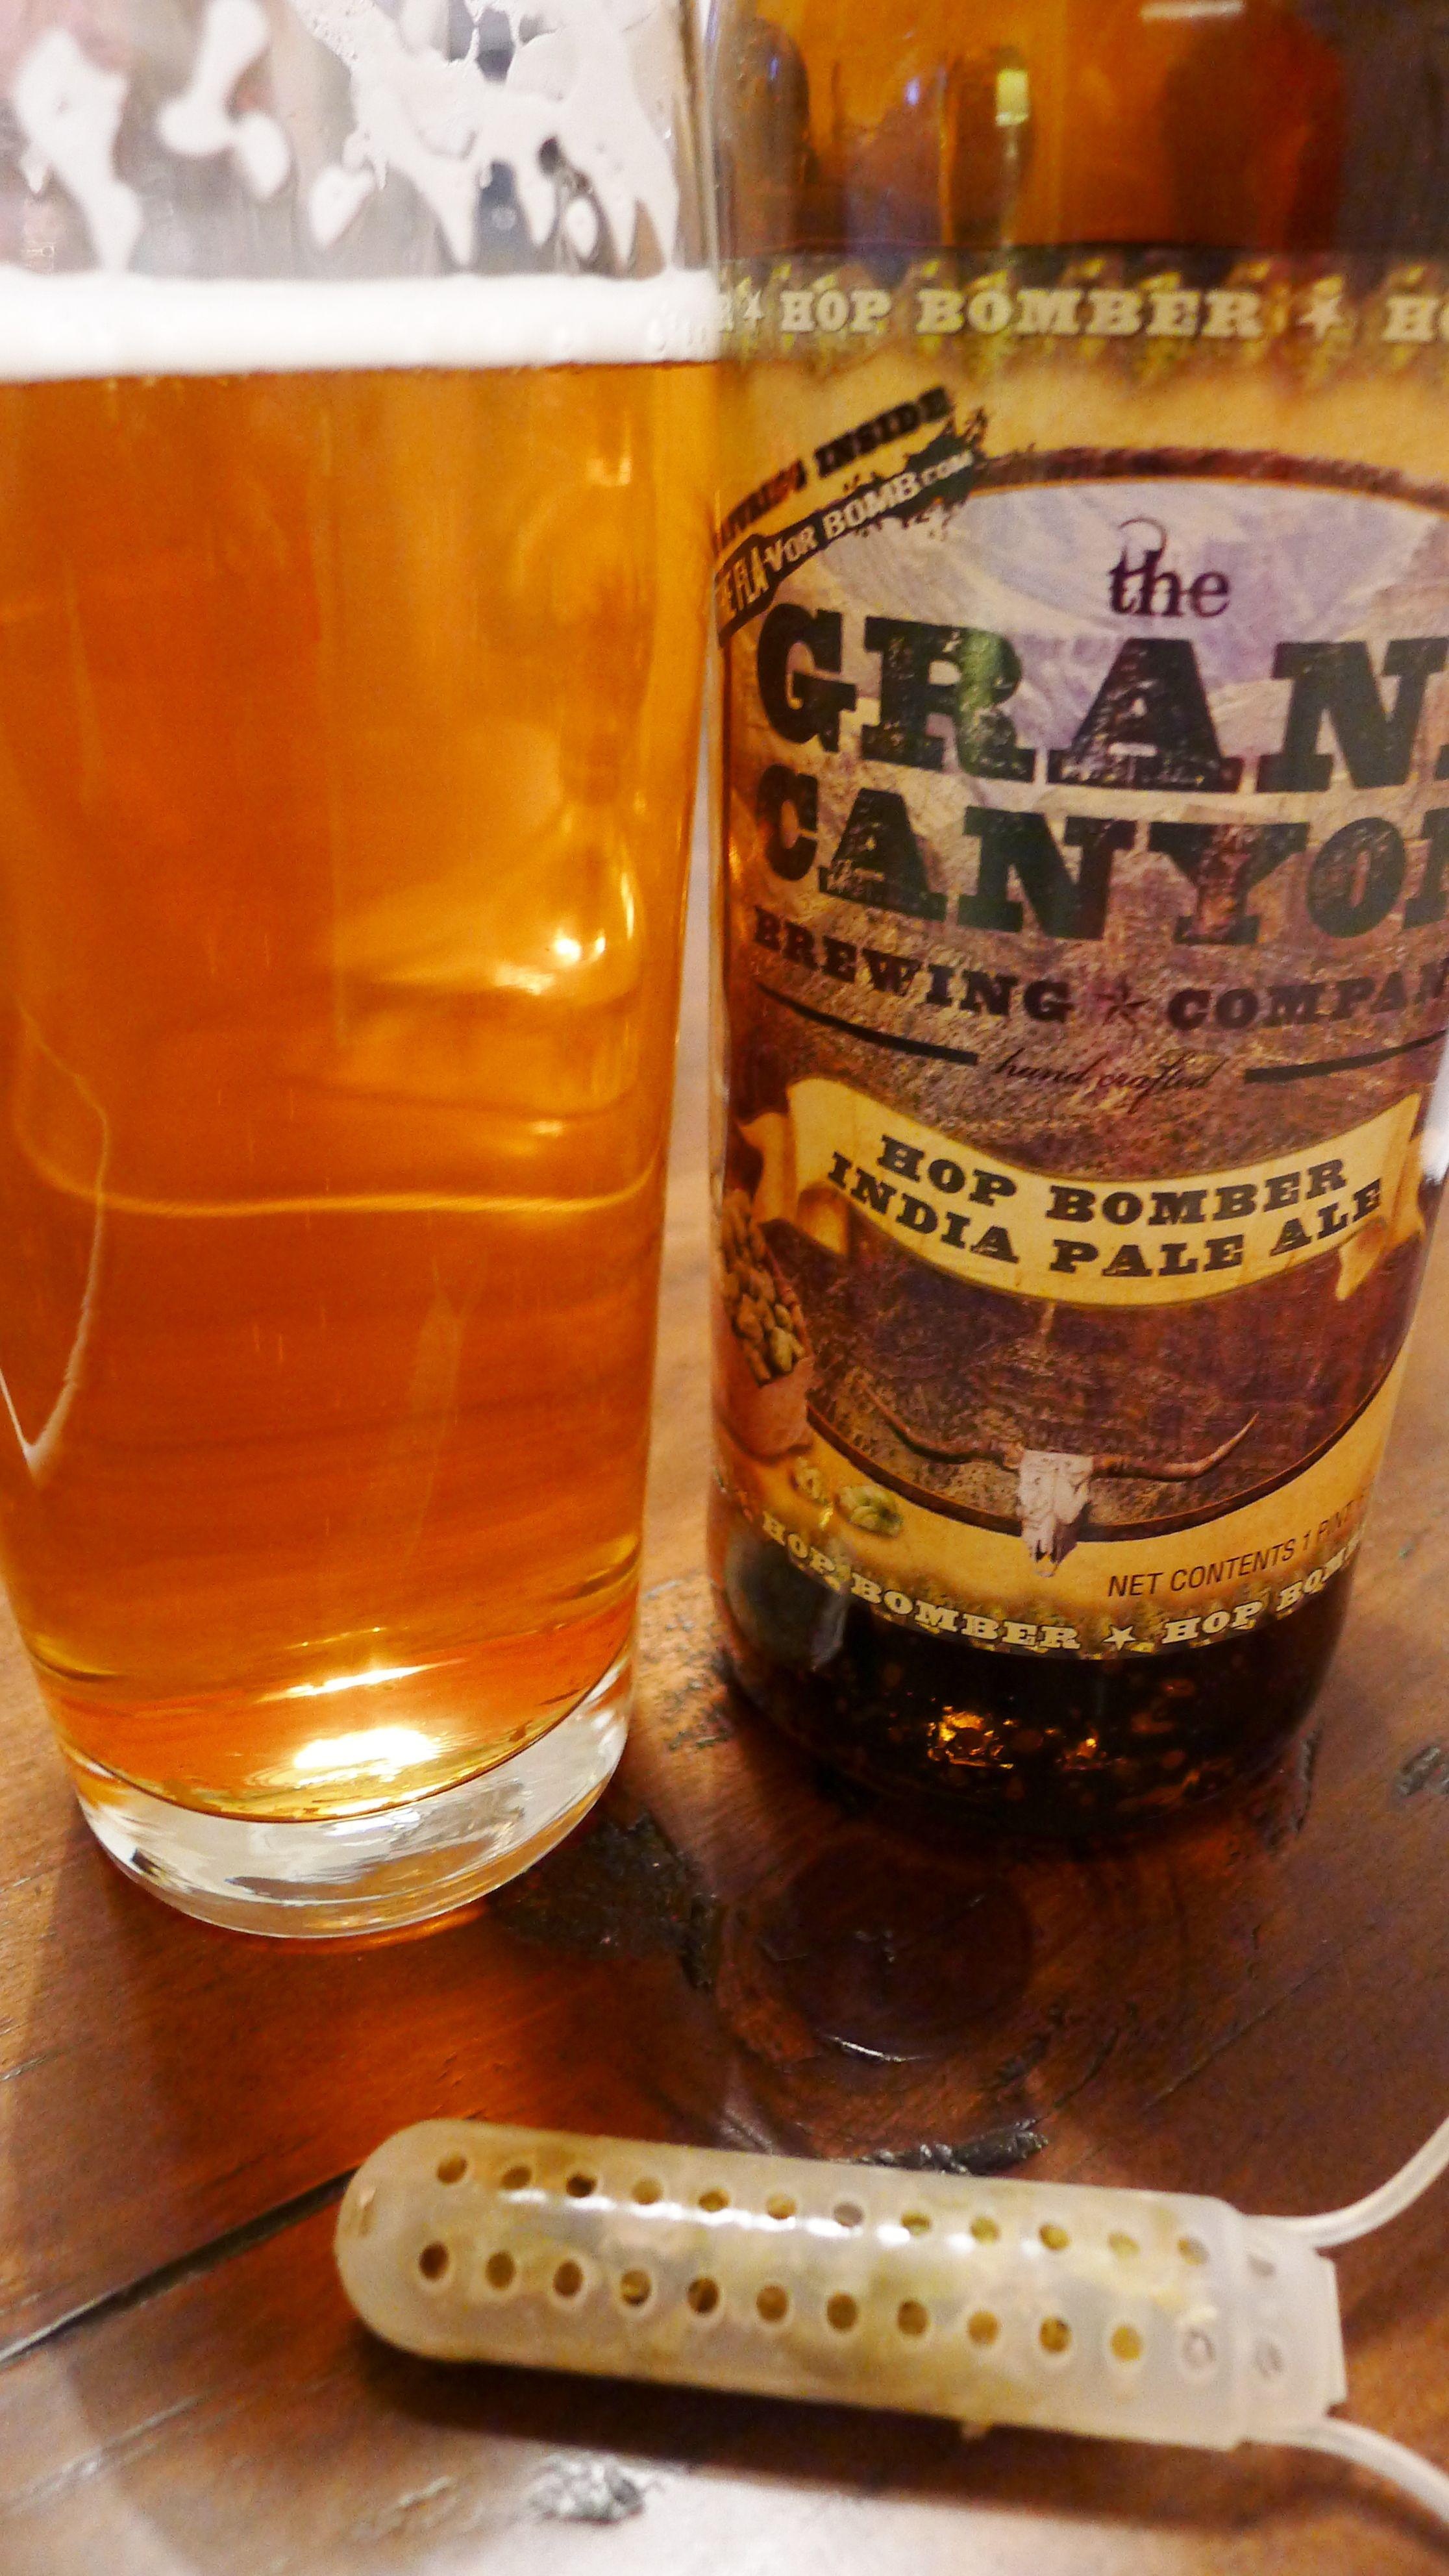 Grand Canyon IPA Logo - Too Much of a Good Thing